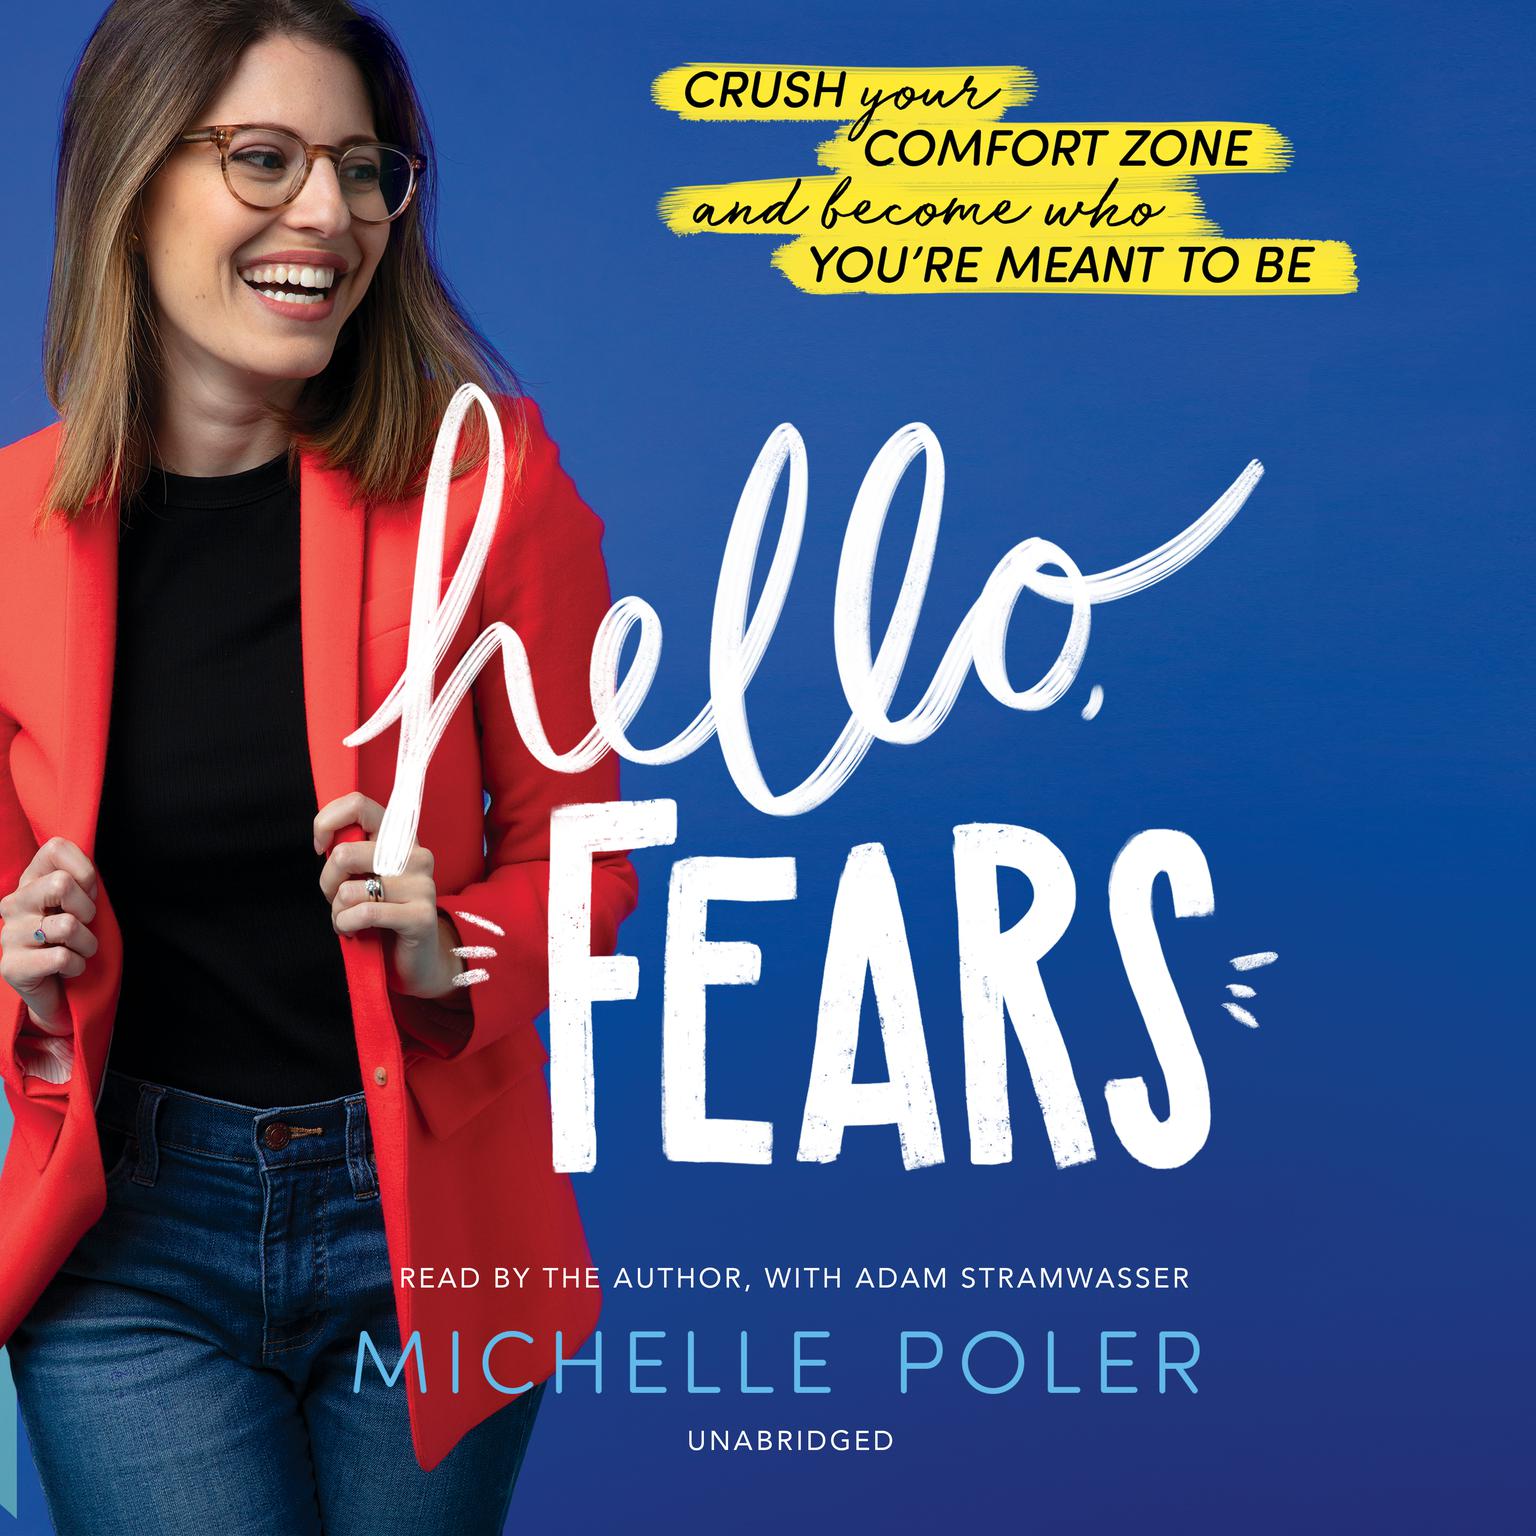 Hello, Fears: Crush Your Comfort Zone and Become Who You’re Meant to Be Audiobook, by Michelle Poler